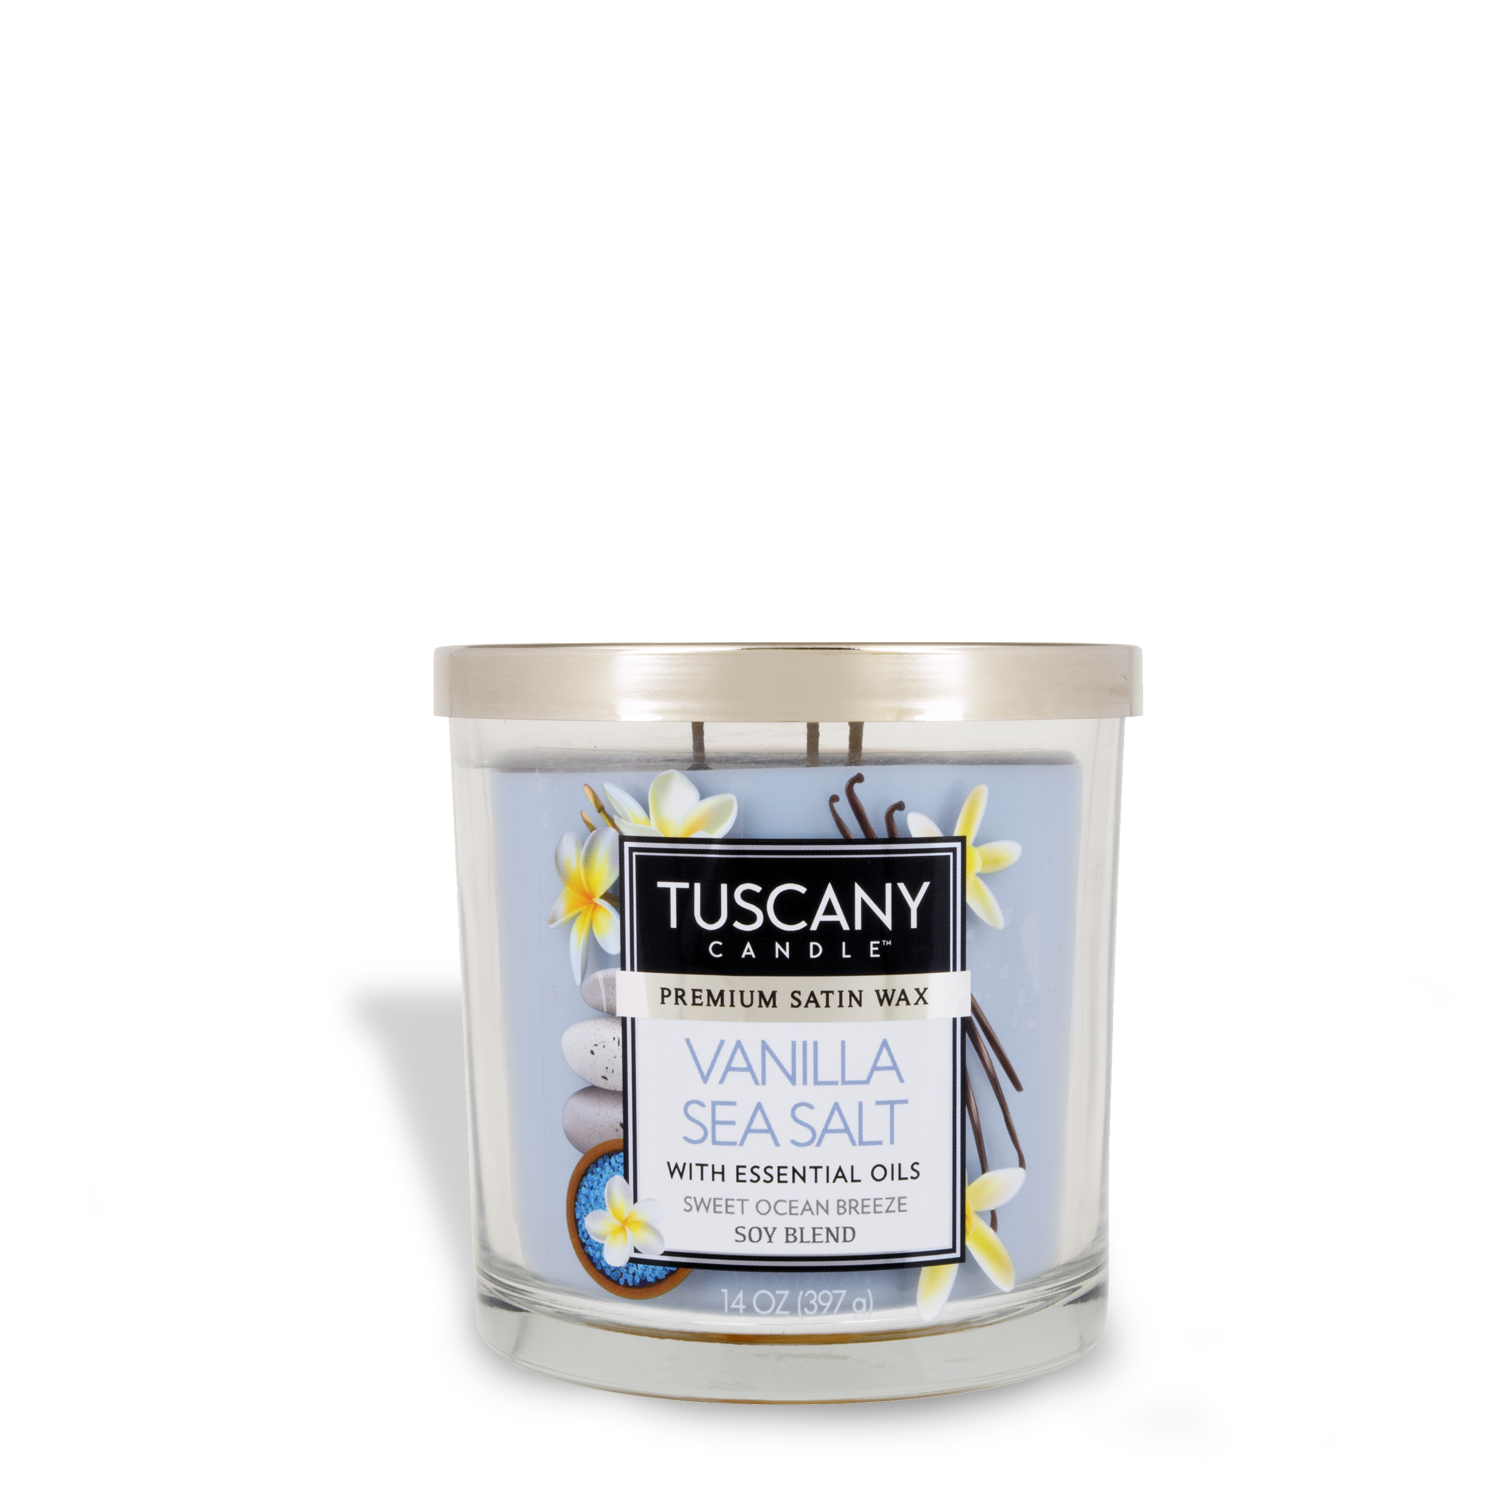 Tuscany Candle® EVD Vanilla Sea Salt Long-Lasting Scented Jar Candle (14 oz) infused with essential oils for a clean burn and long-lasting fragrance.